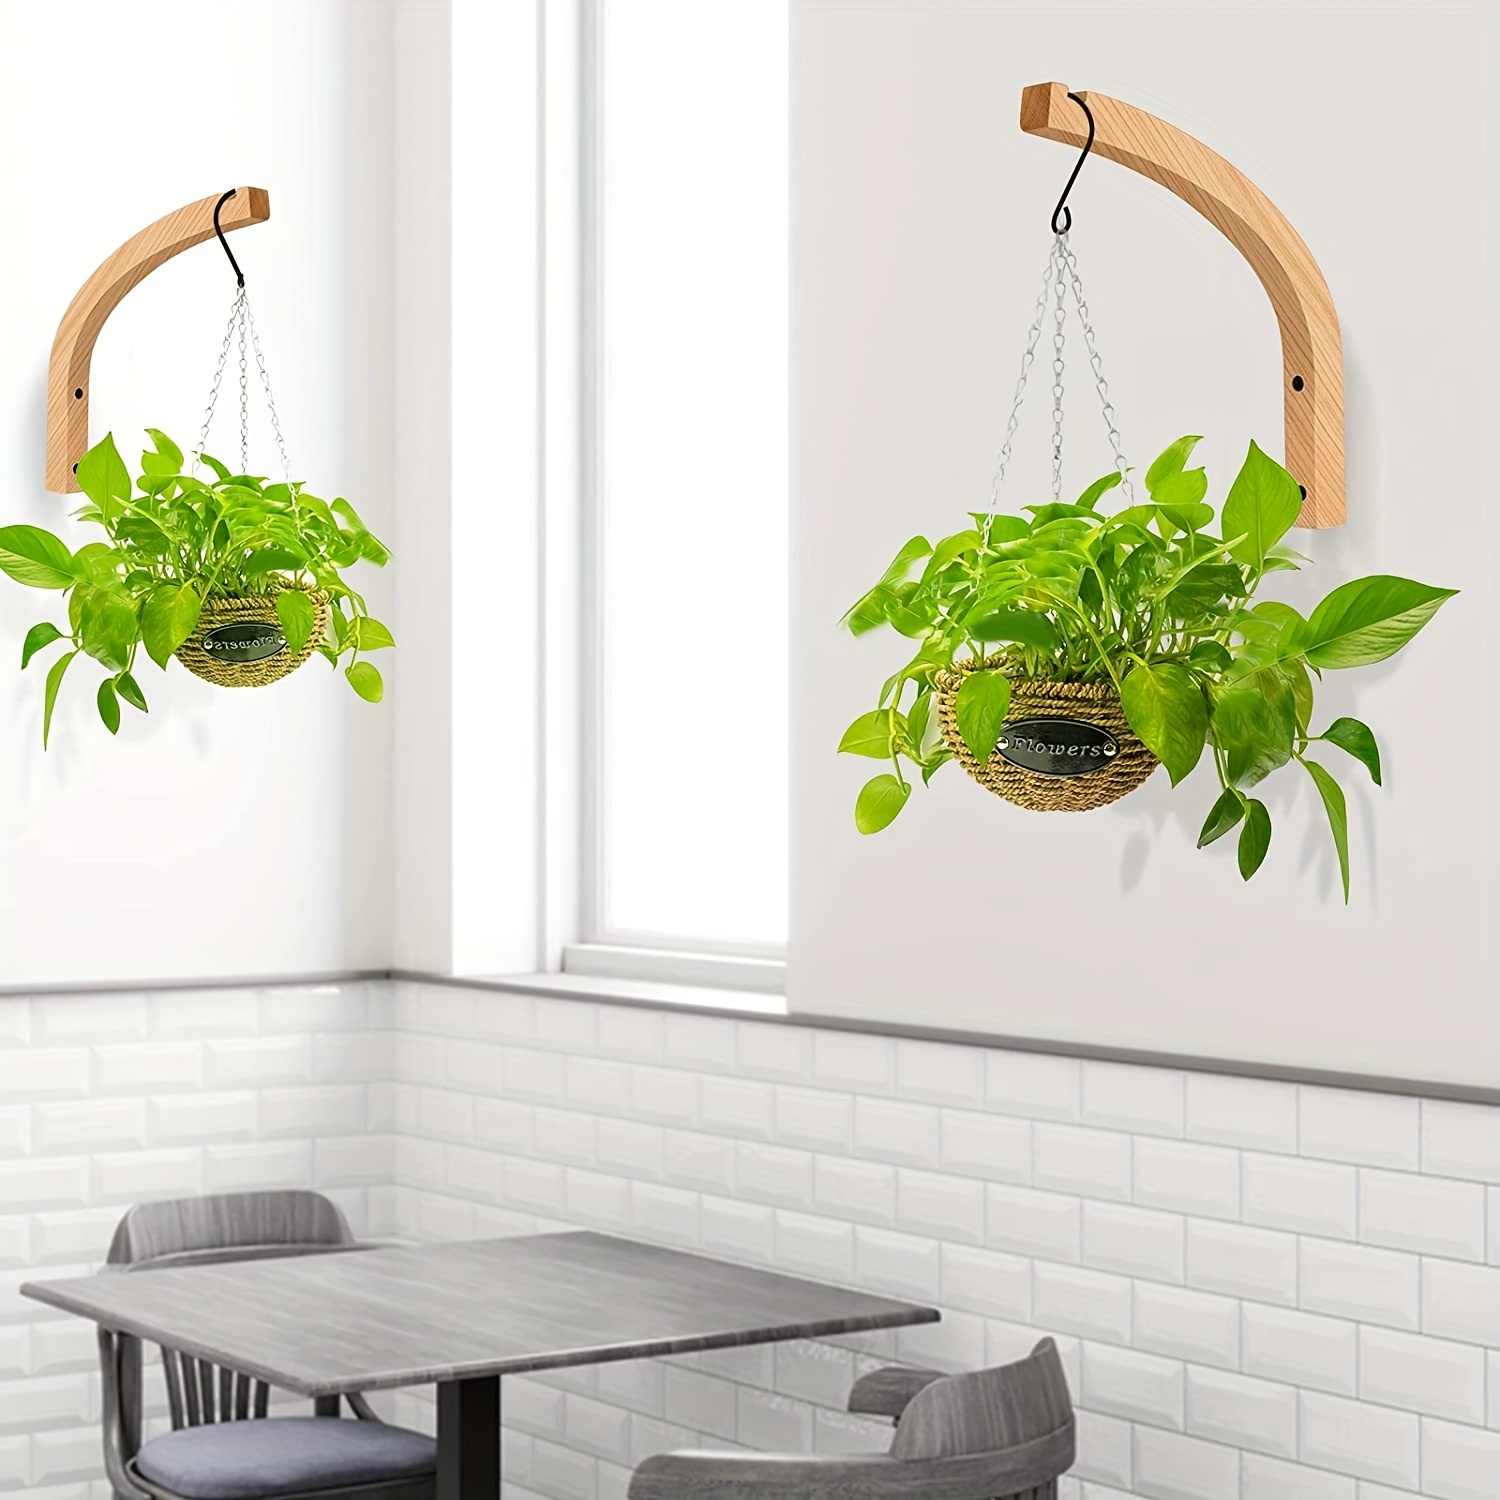 2 Packs Plant Hanger Wall Planters For Indoor Plants Wooden Wall